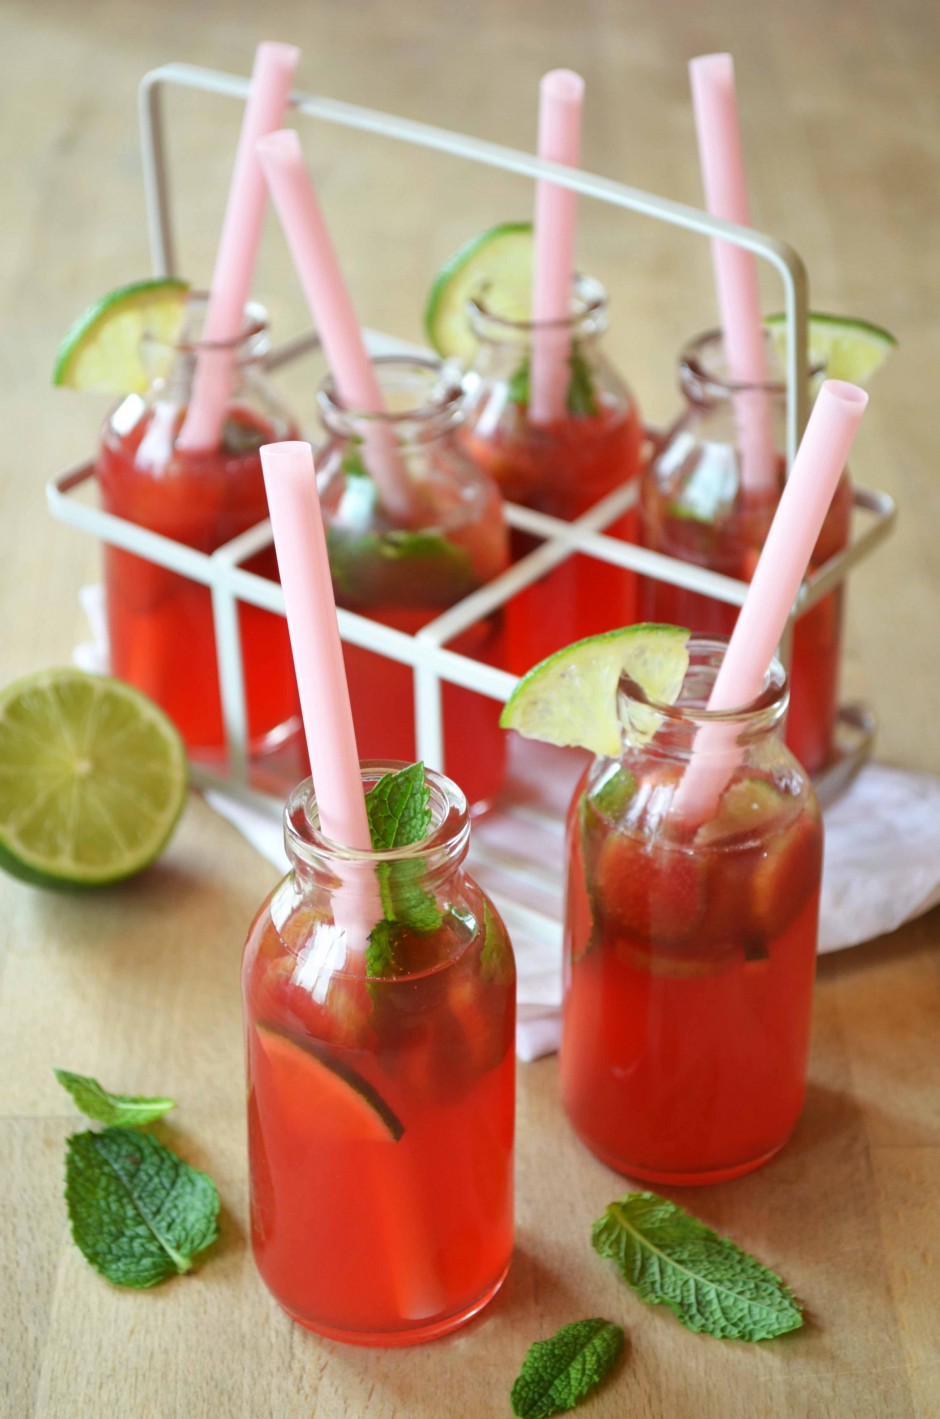 Strawberry Rhubarb Lemonade with Lime, Mint, Vanilla and Ginger. Recipe and photo by That Healthy Kitchen